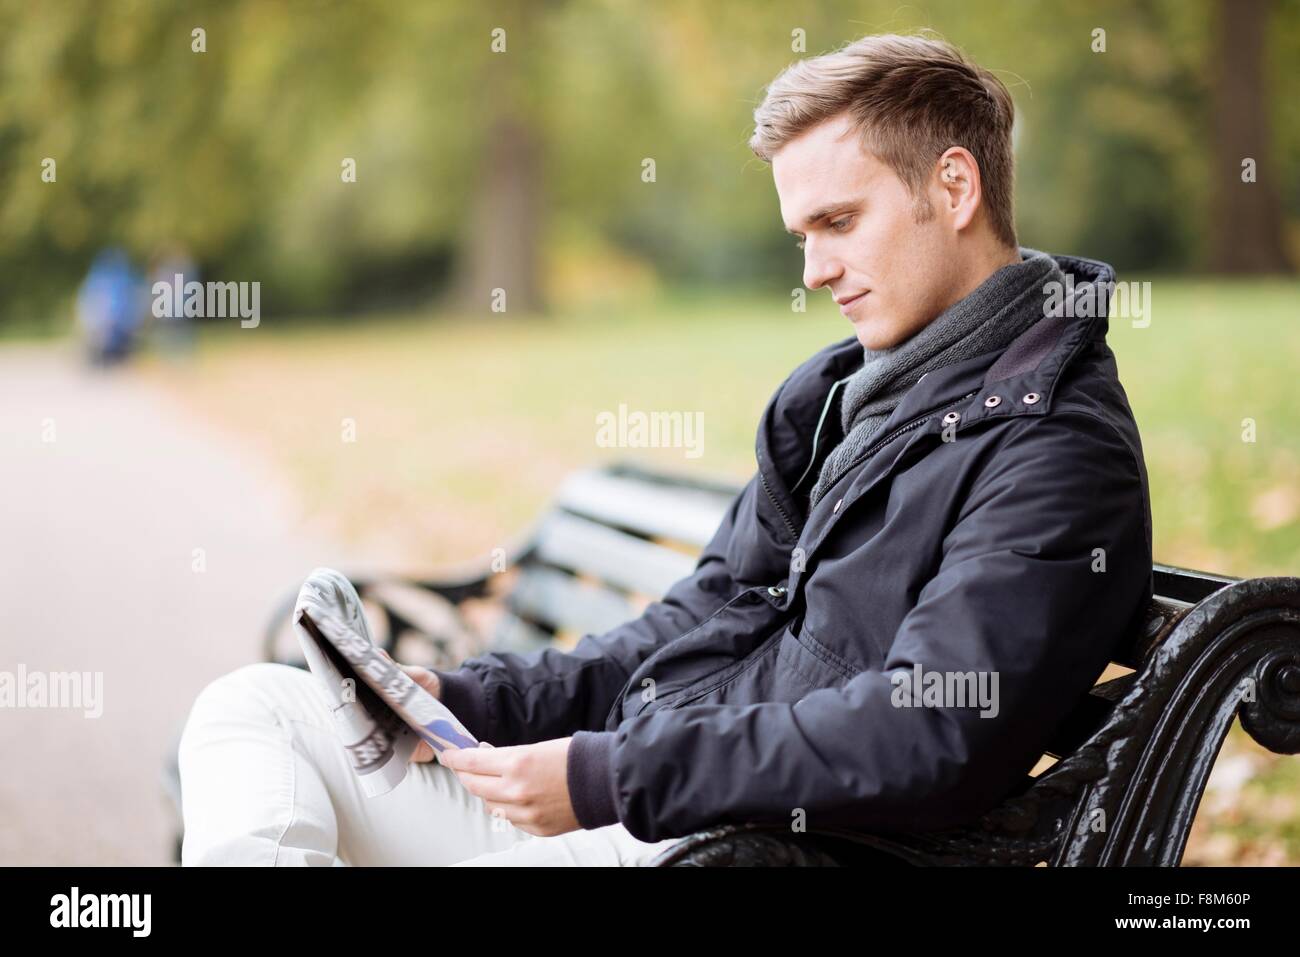 Young man sitting on bench reading newspaper in park Banque D'Images